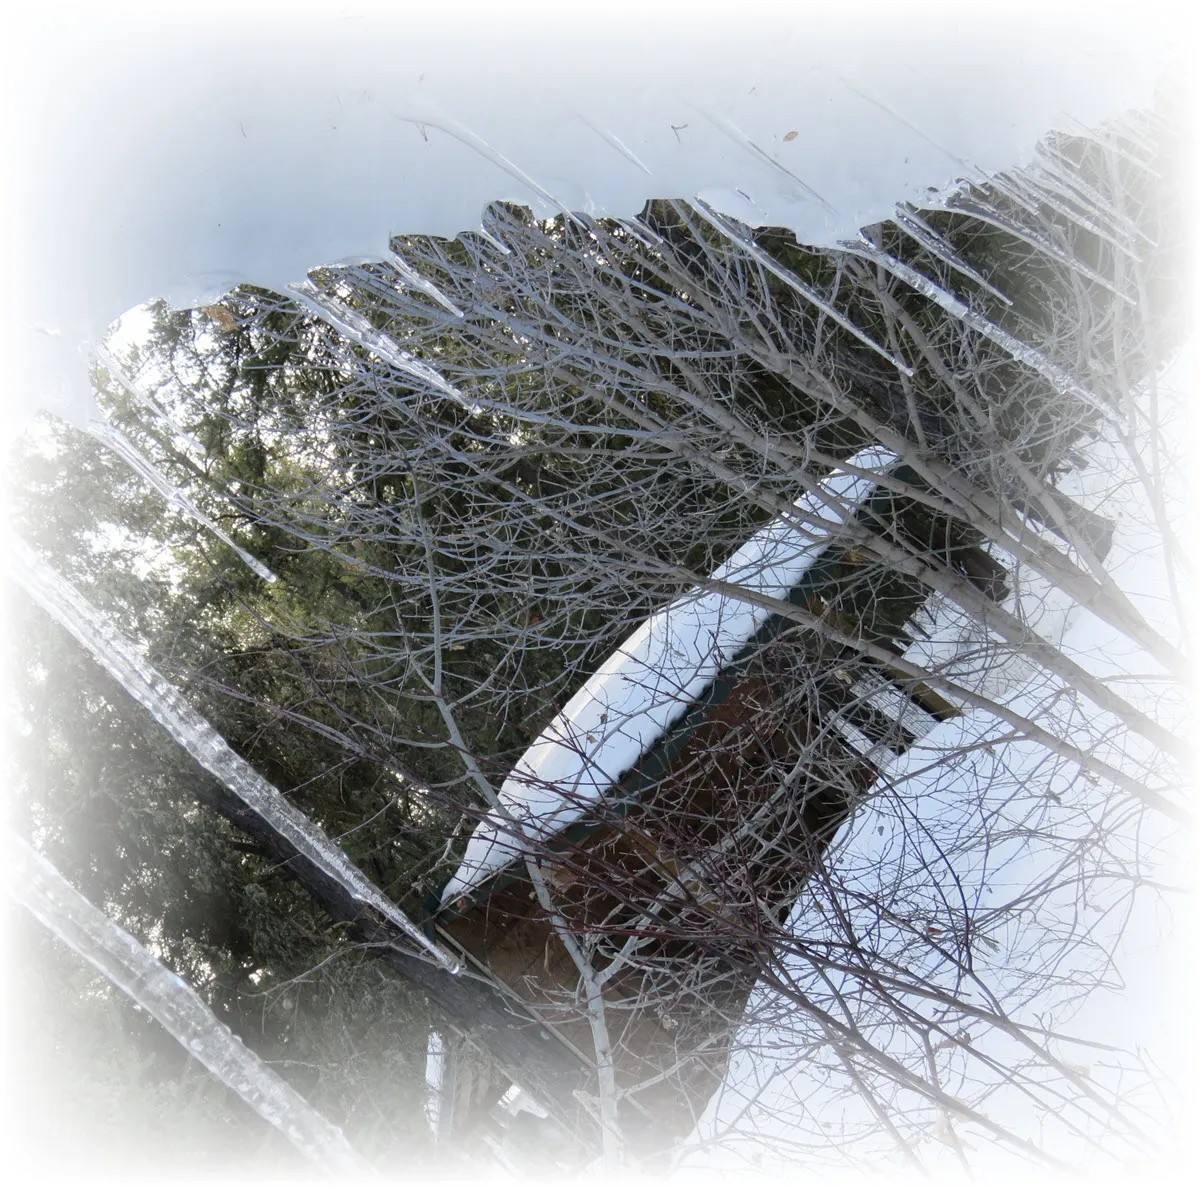 view from under the icicles sliding off studio roof looking towards snowy scene by run.JPG